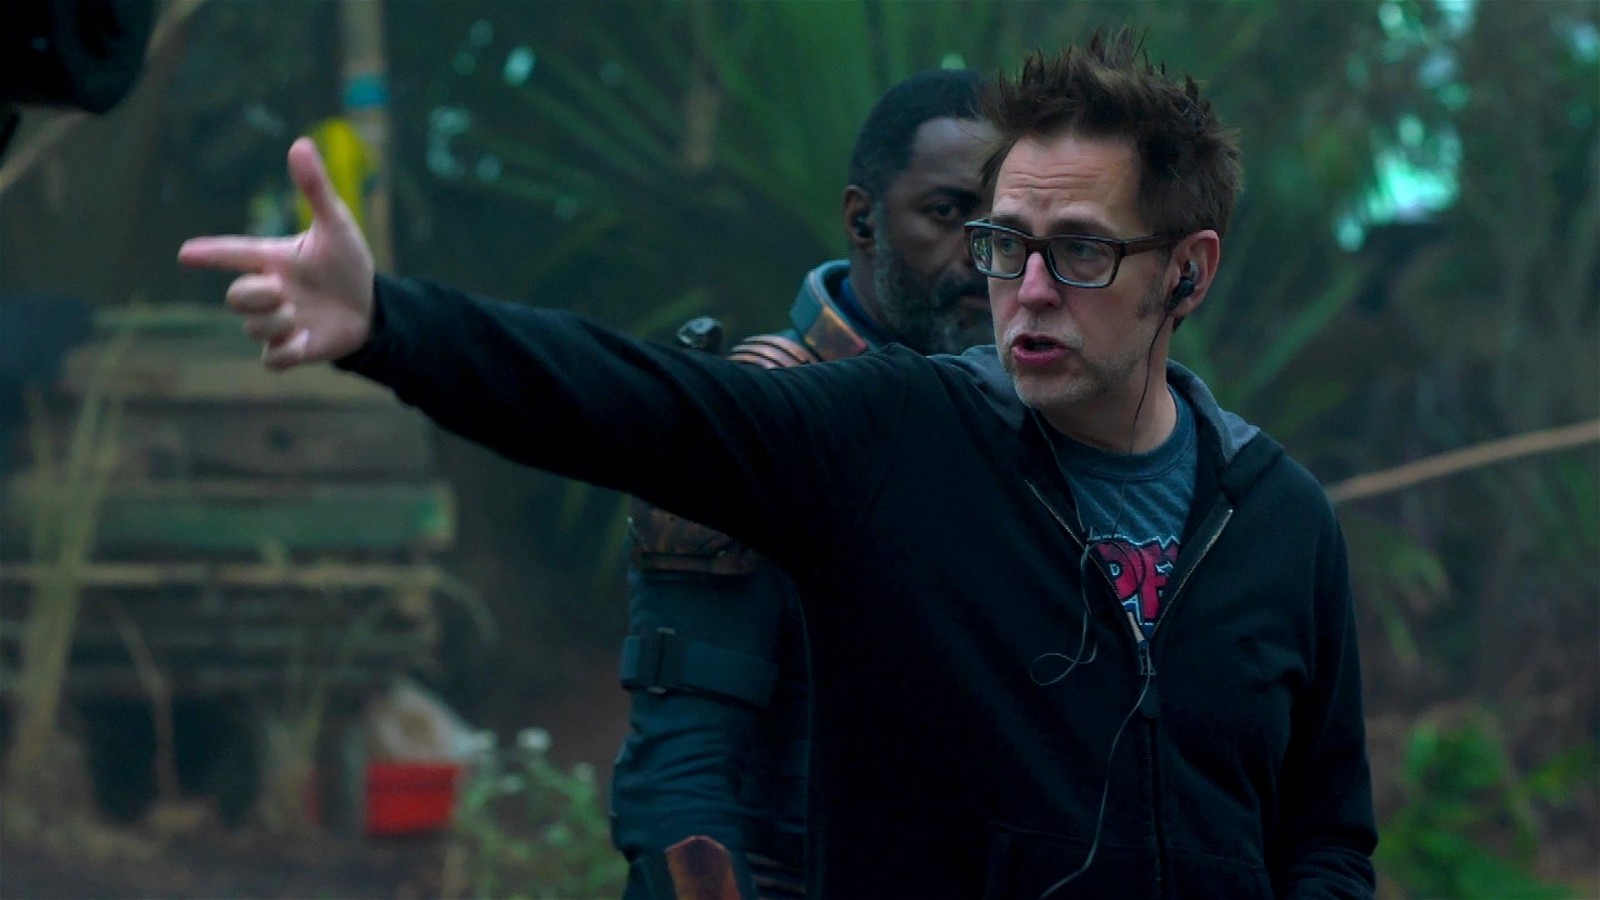 James Gunn on The Suicide Squad sets